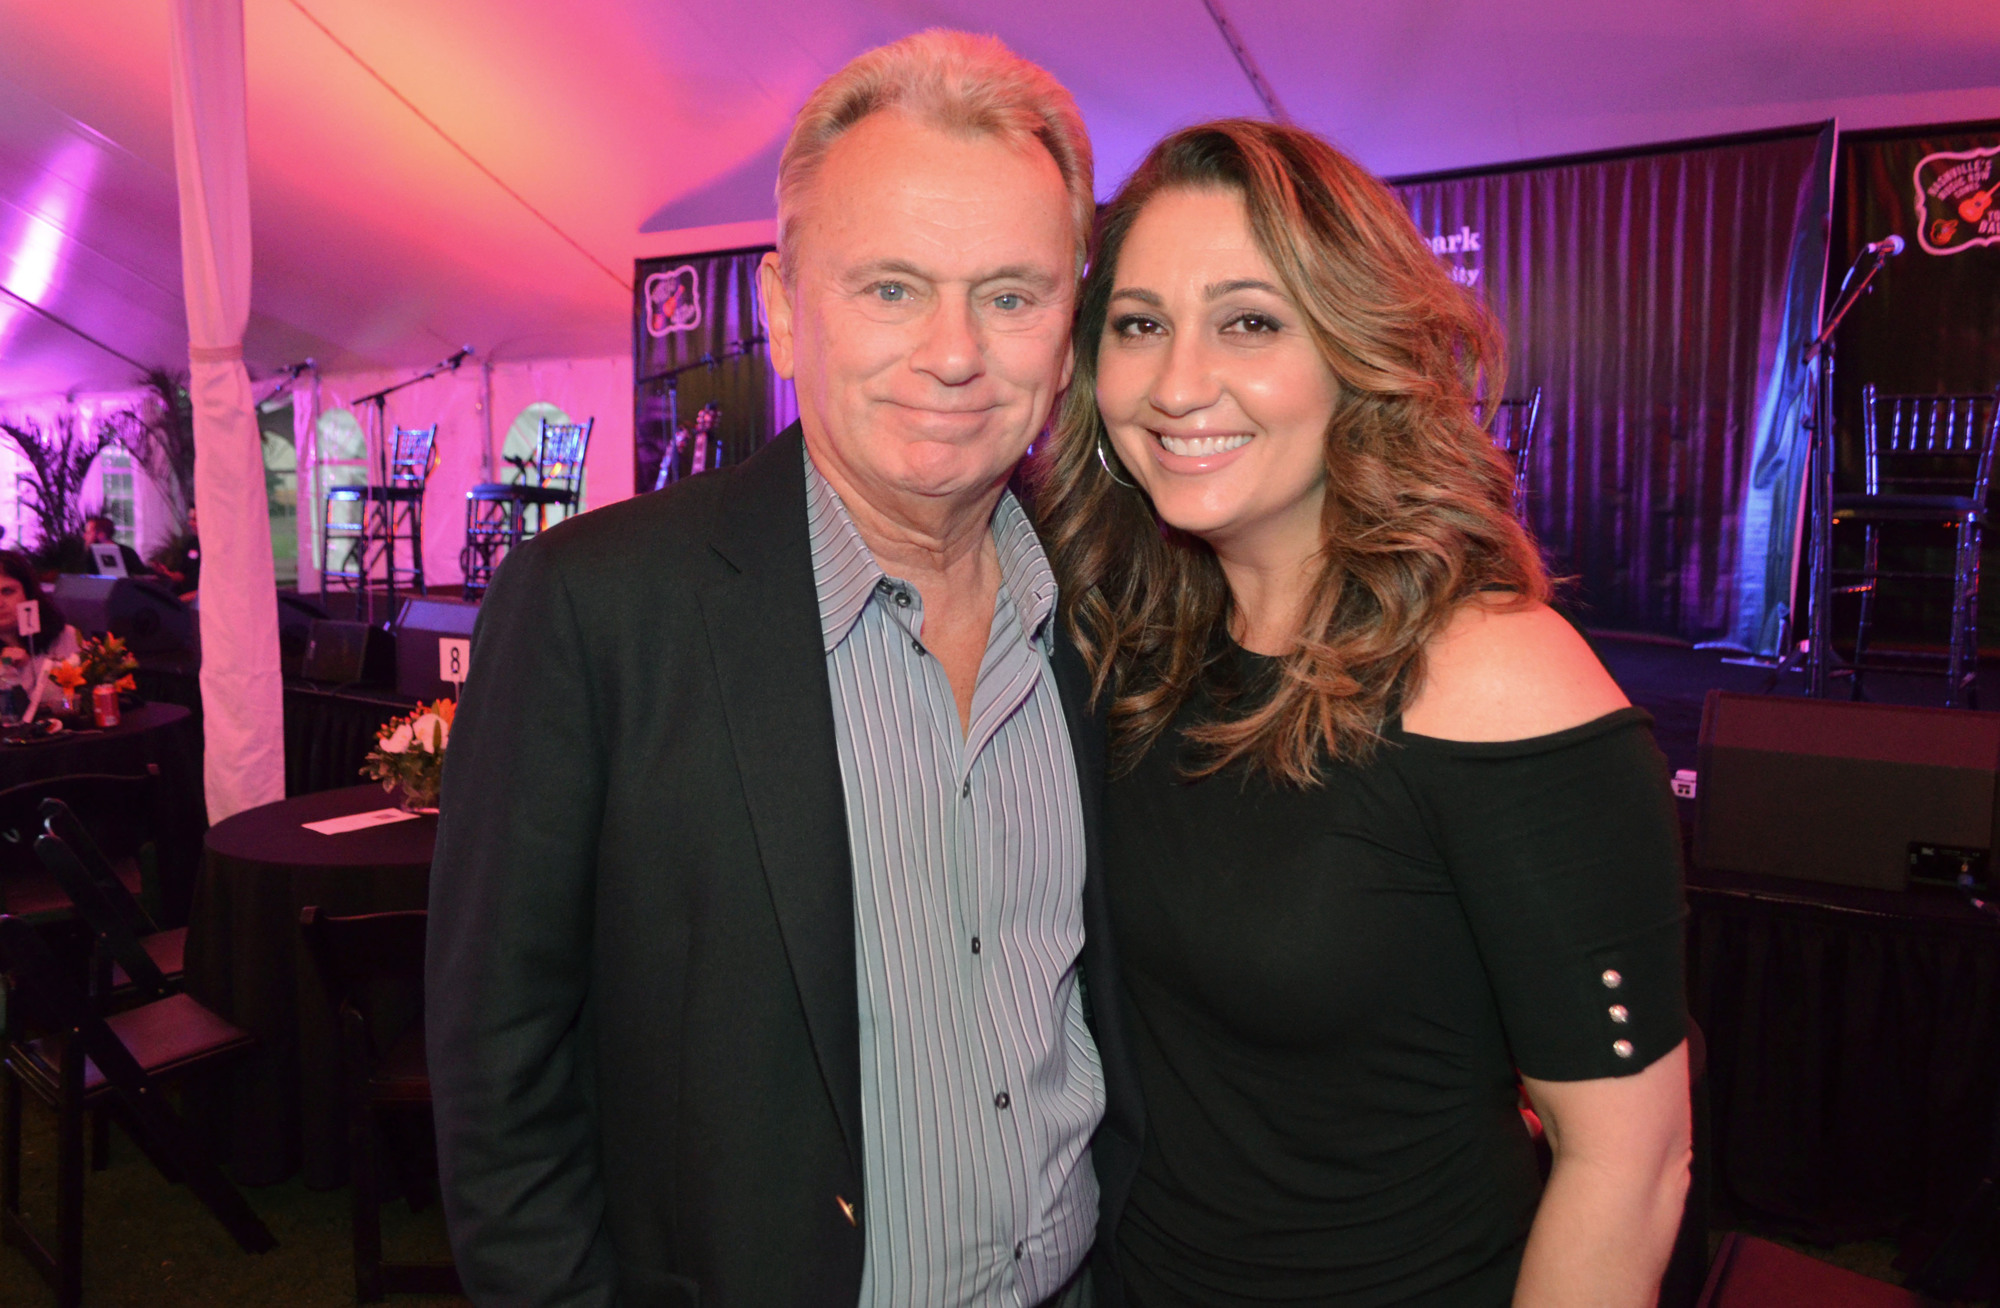 Pat and Lesly Sajak attended Nashville’s Music Row Comes to the Ballpark on March 17 at Ed Smith Stadium. Photo by Niki Kottmann